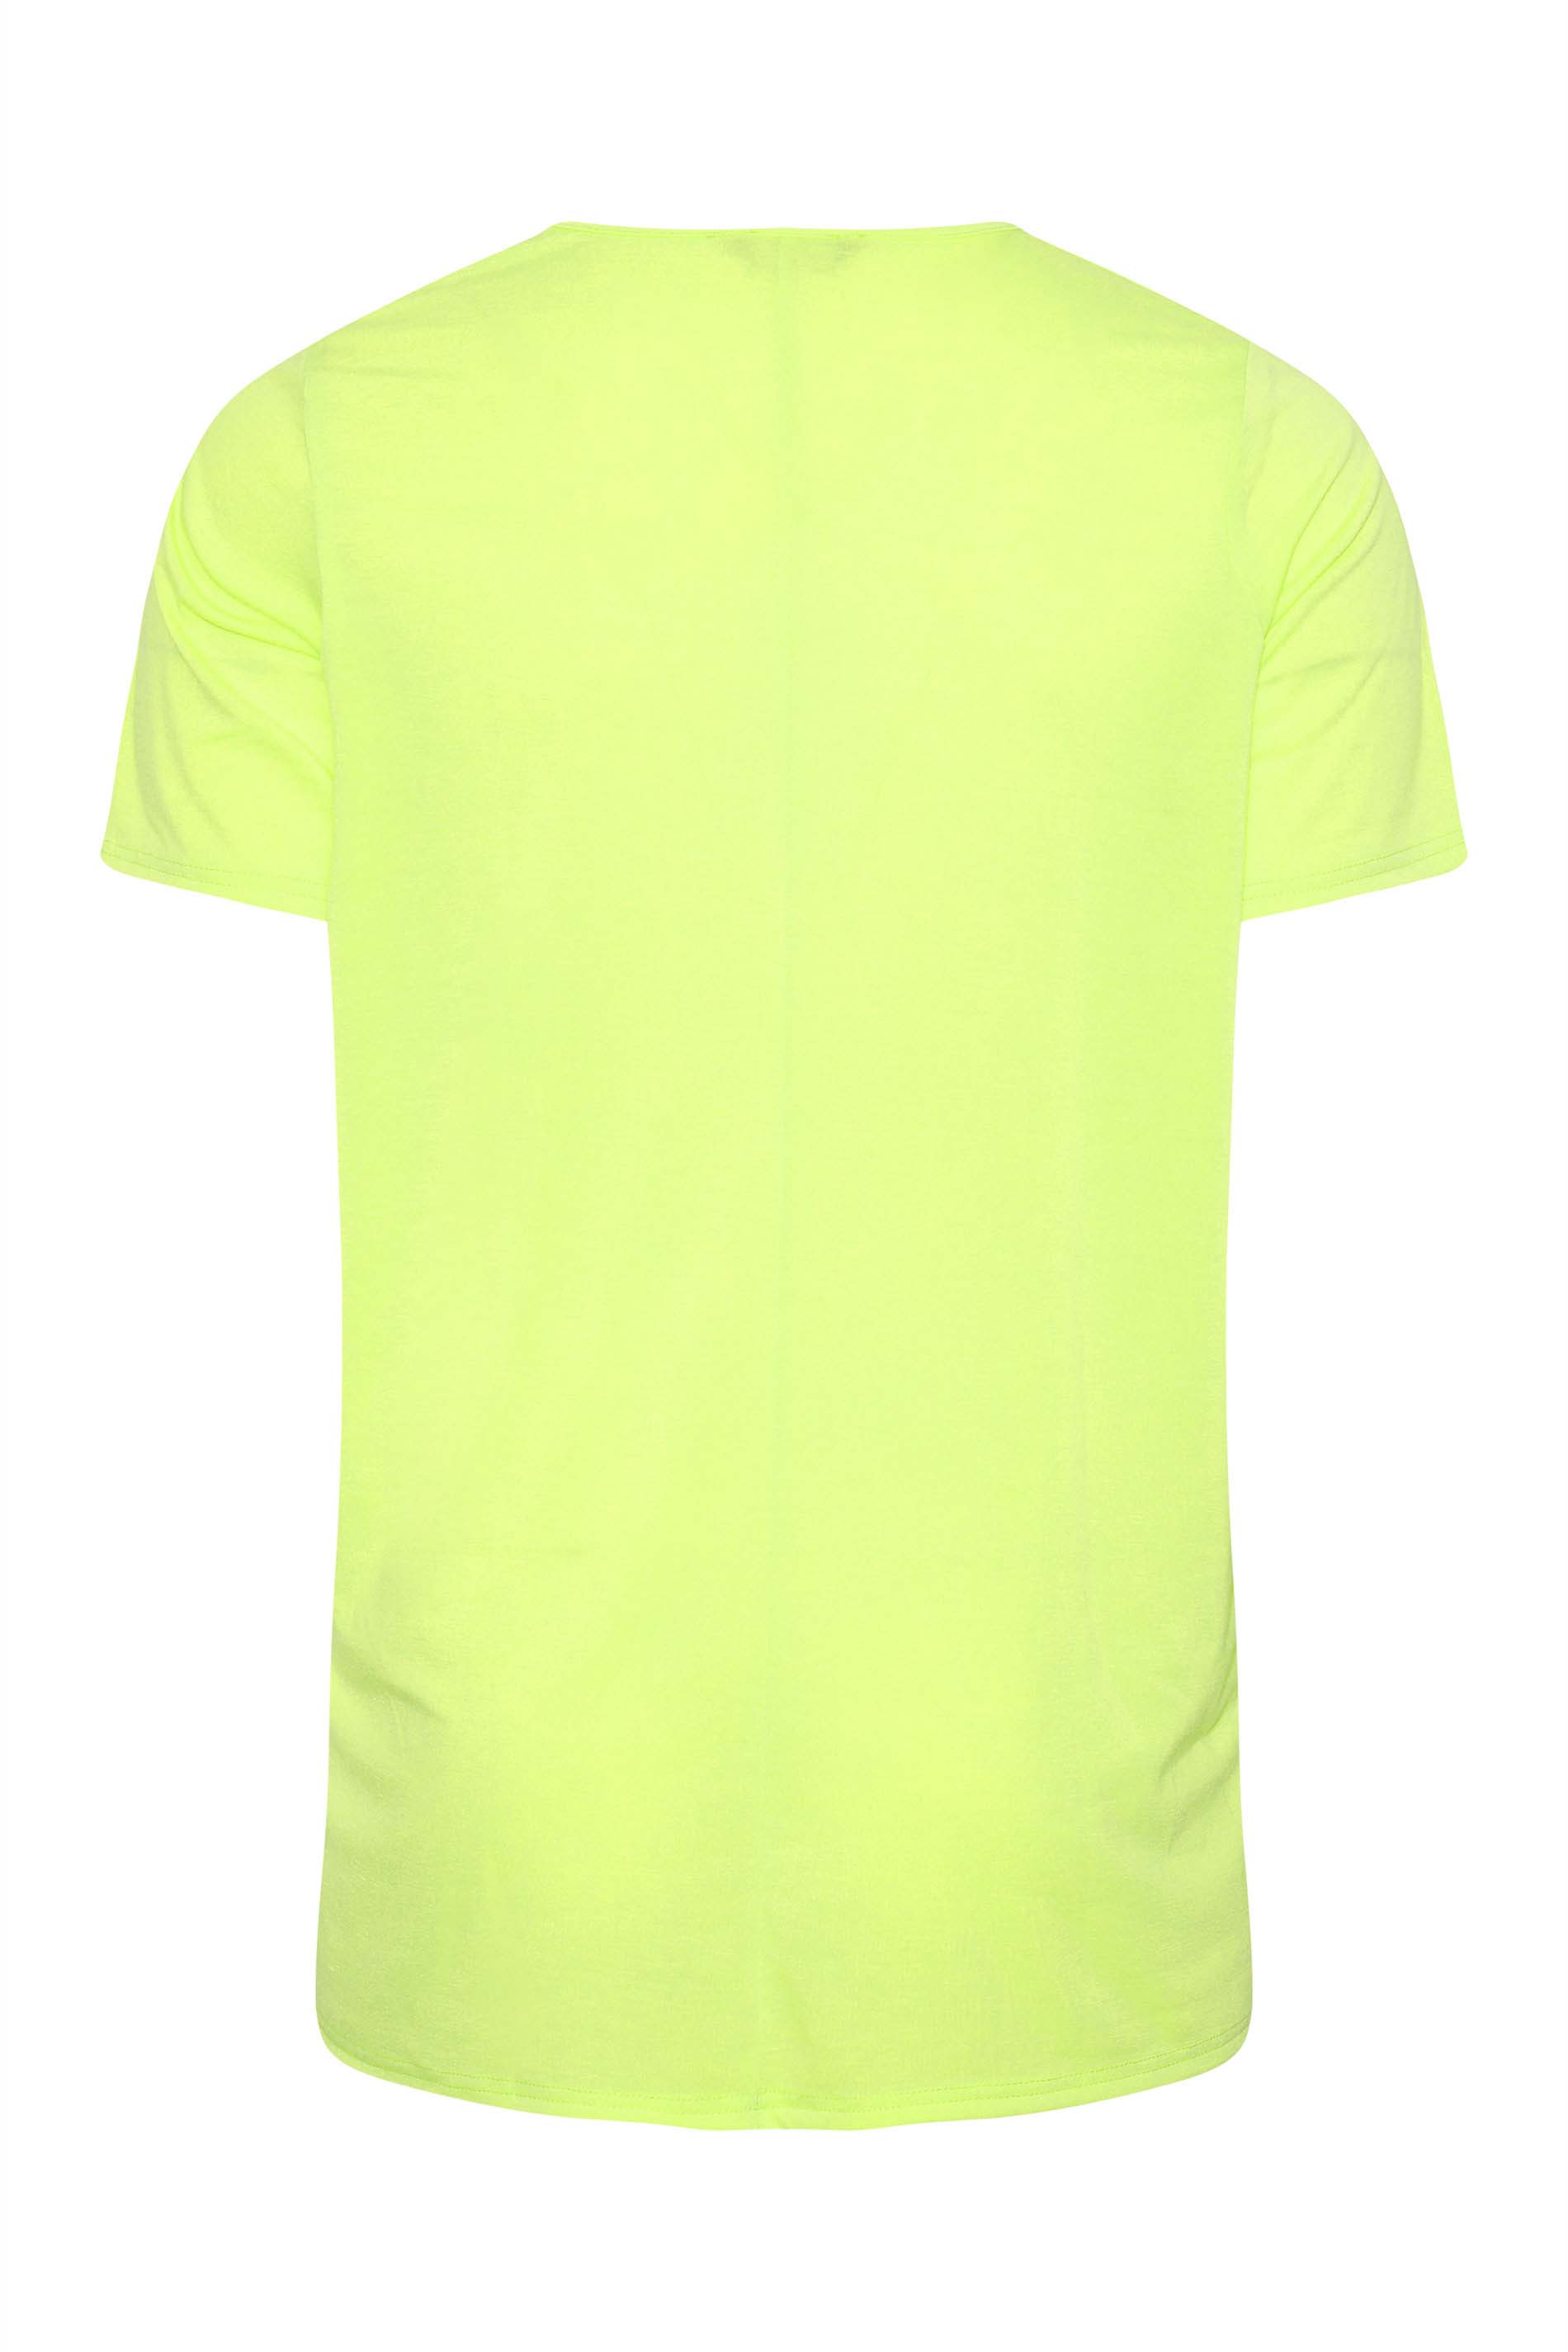 Grande taille  Tops Grande taille  T-Shirts | LIMITED COLLECTION - T-Shirt Vert Citron Couture en Jersey - IX76147